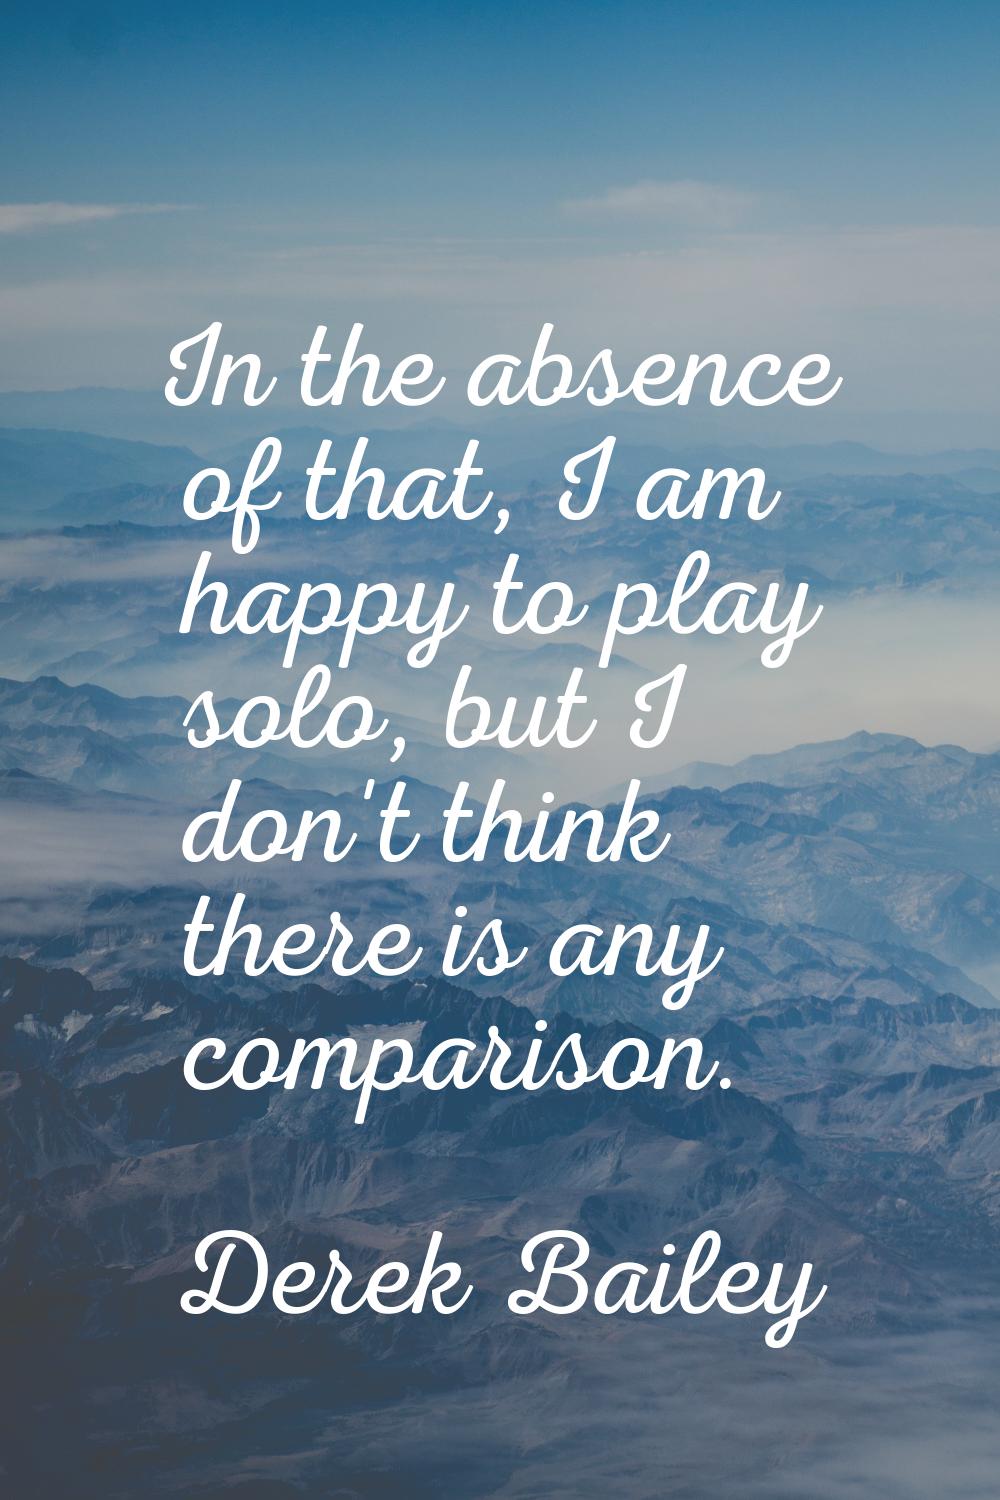 In the absence of that, I am happy to play solo, but I don't think there is any comparison.